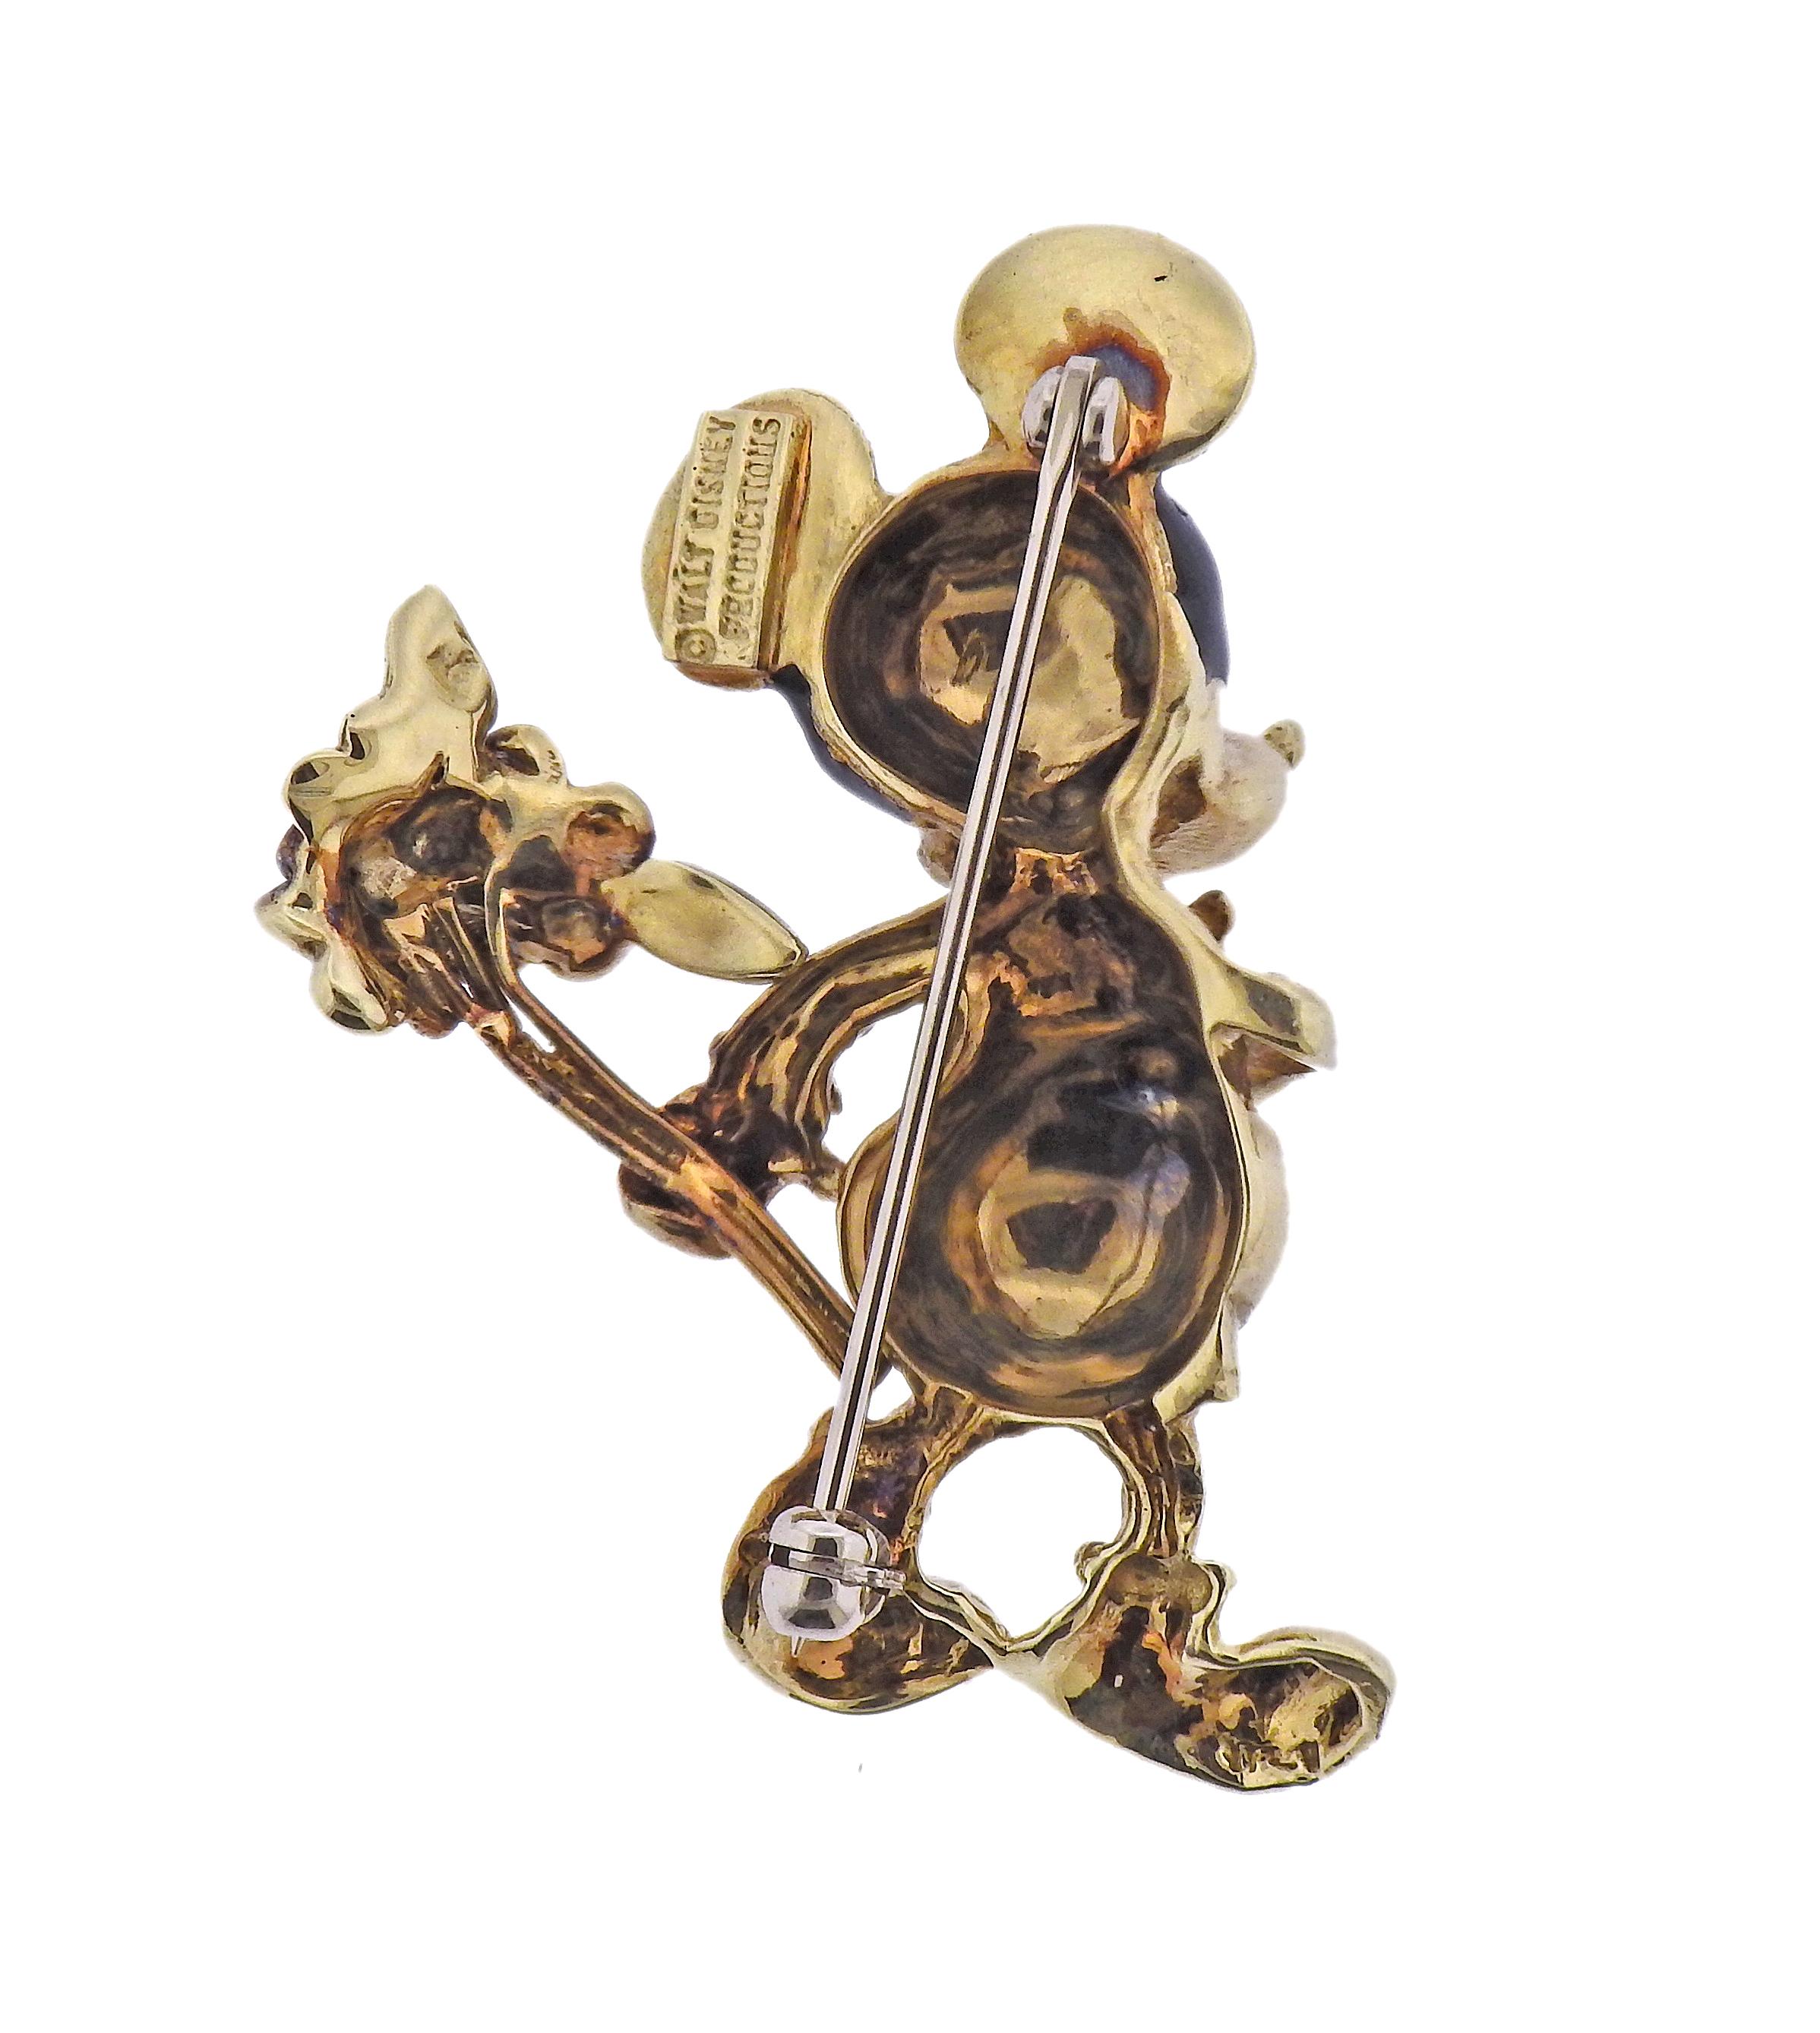 14k yellow gold Walt Disney collectable Mickey Mouse brooch , decorated with enamel. Brooch measures 1.5